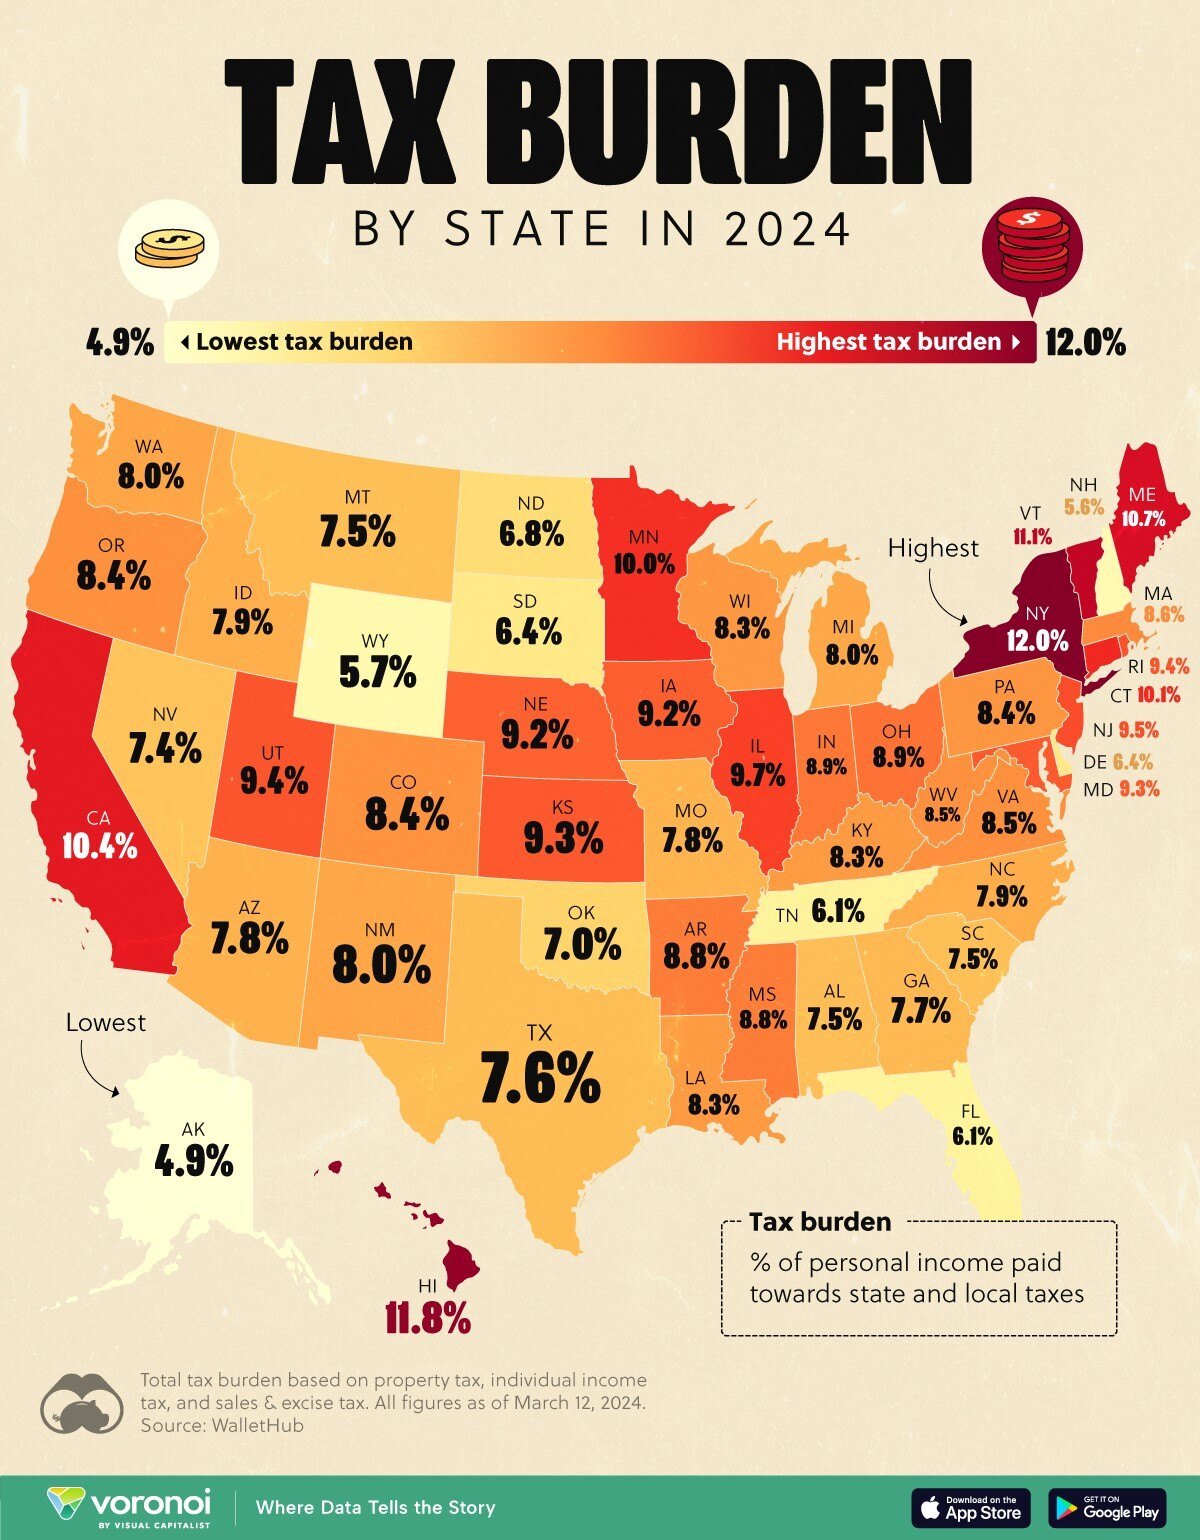  A map of the United States displaying the percentage of personal income paid toward state and local taxes by state in 2024. States with the highest tax percentages are depicted in dark red, while those with the lower percentages transition through shades of orange to yellow.